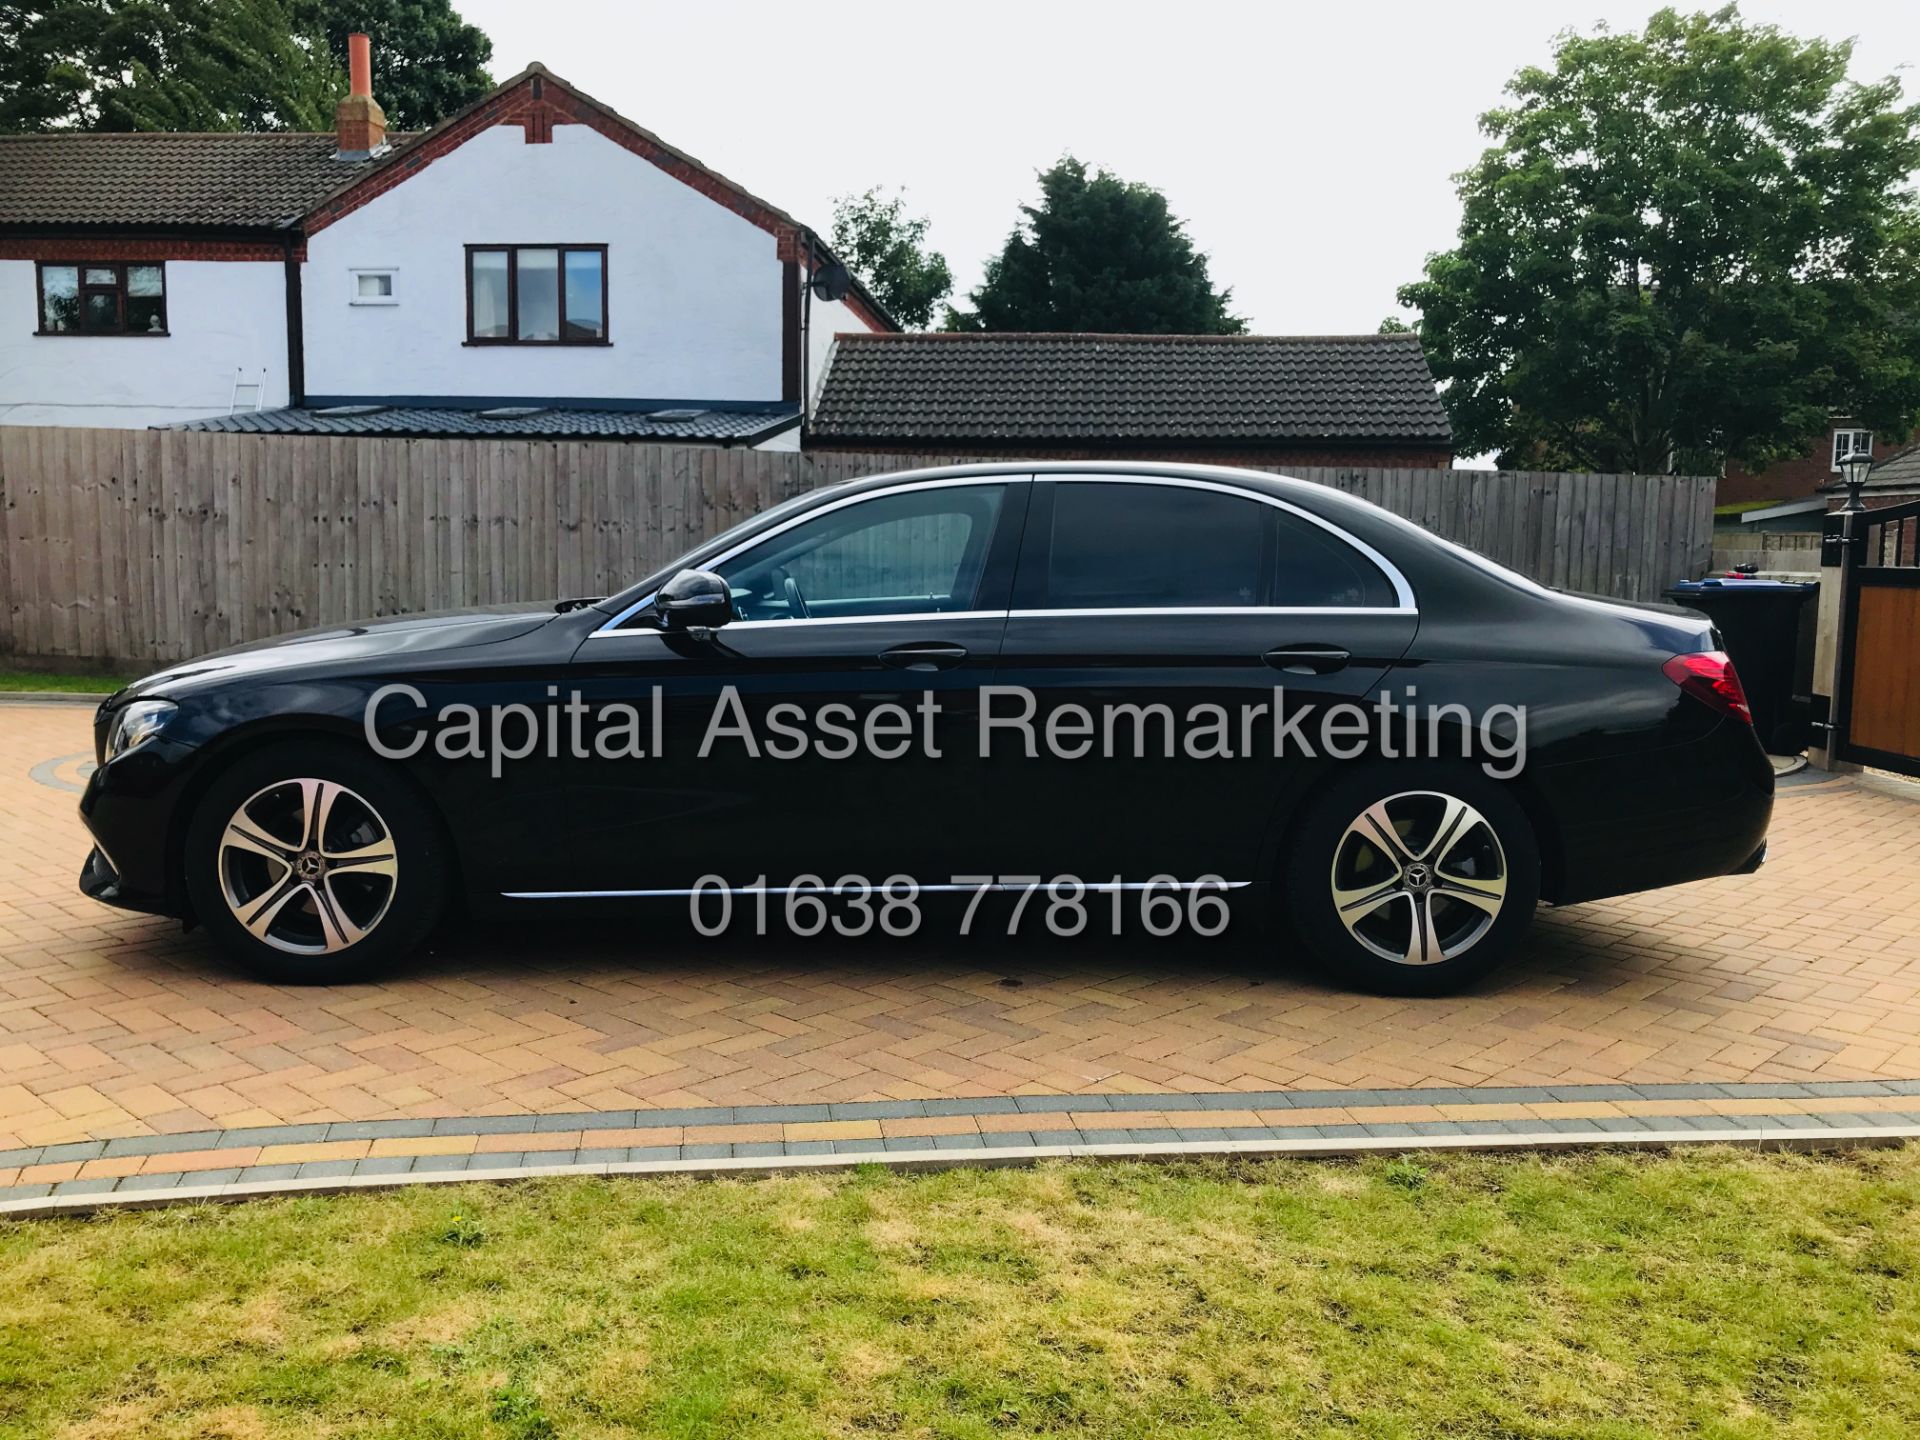 (On Sale) MERCEDES E220d "SPECIAL EQUIPMENT" AUTO (2019) 1 OWNER *GREAT SPEC* TAKE A PEEK - Image 8 of 35